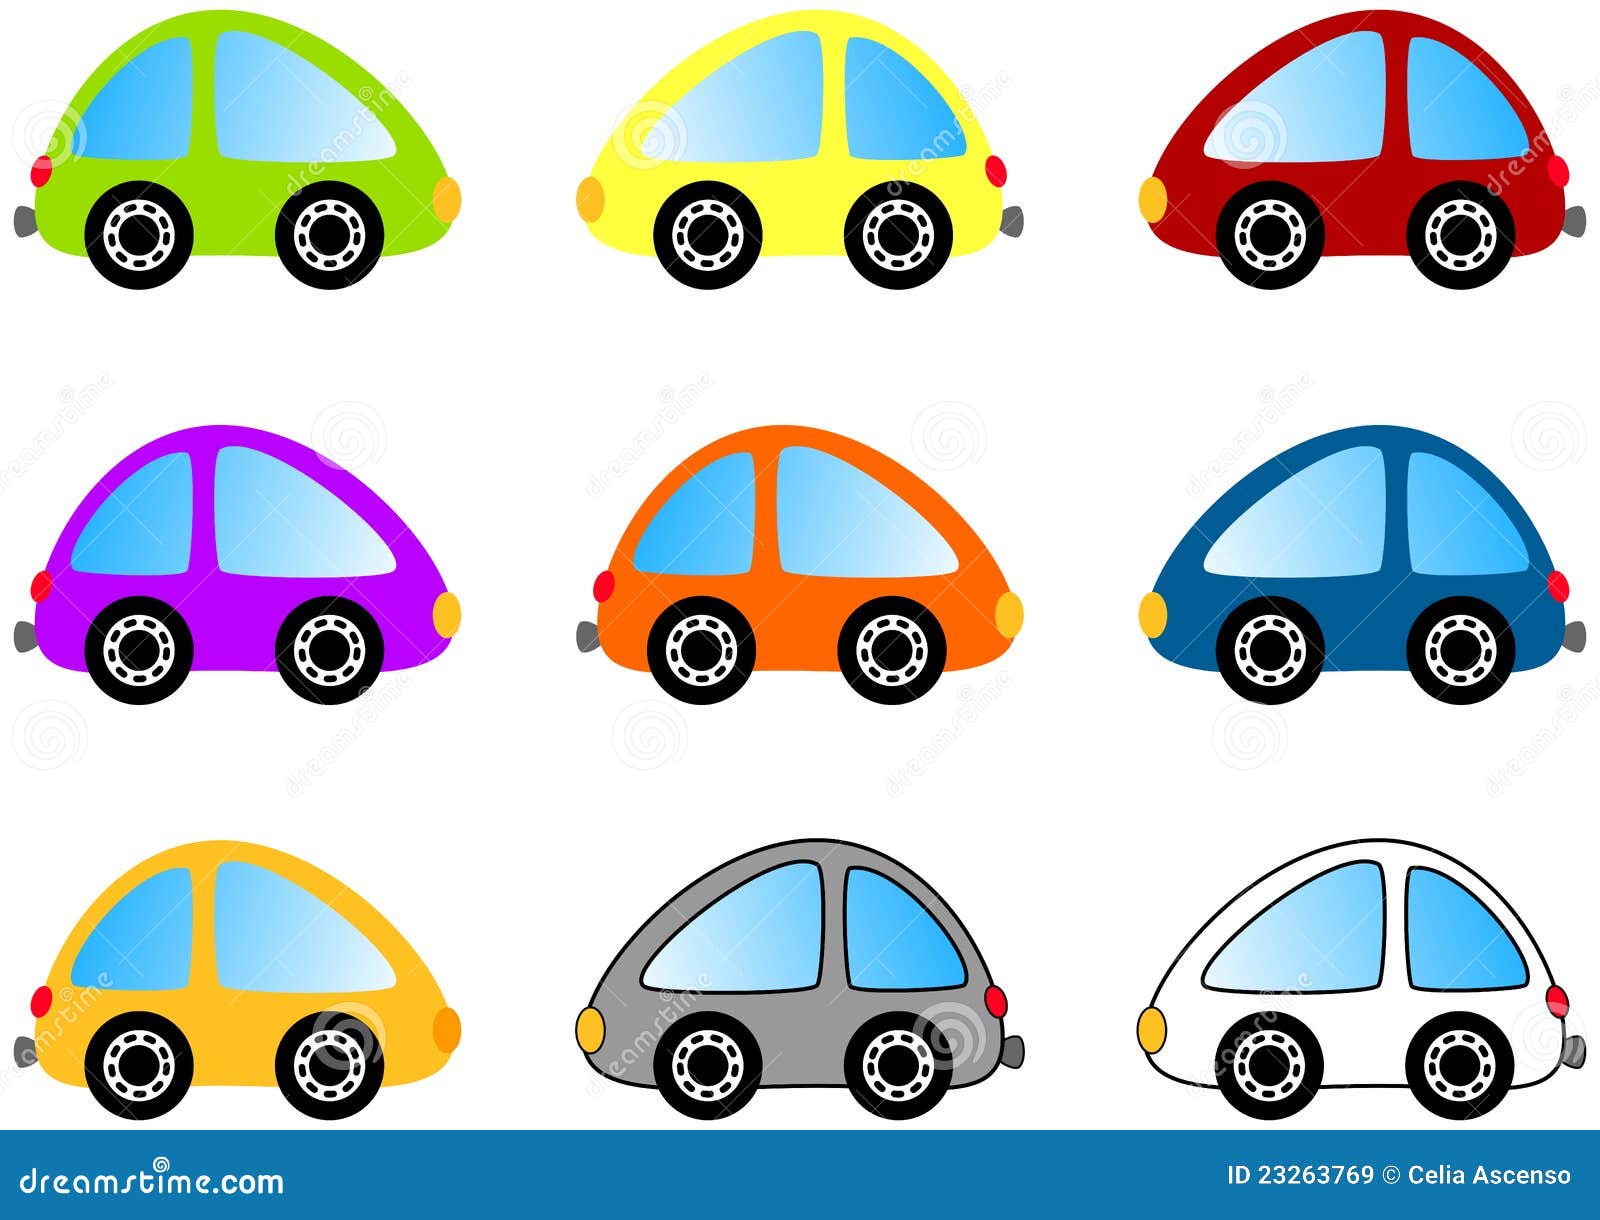 Colorful cartoon car set. Set of colorful cartoon cars on a white background.